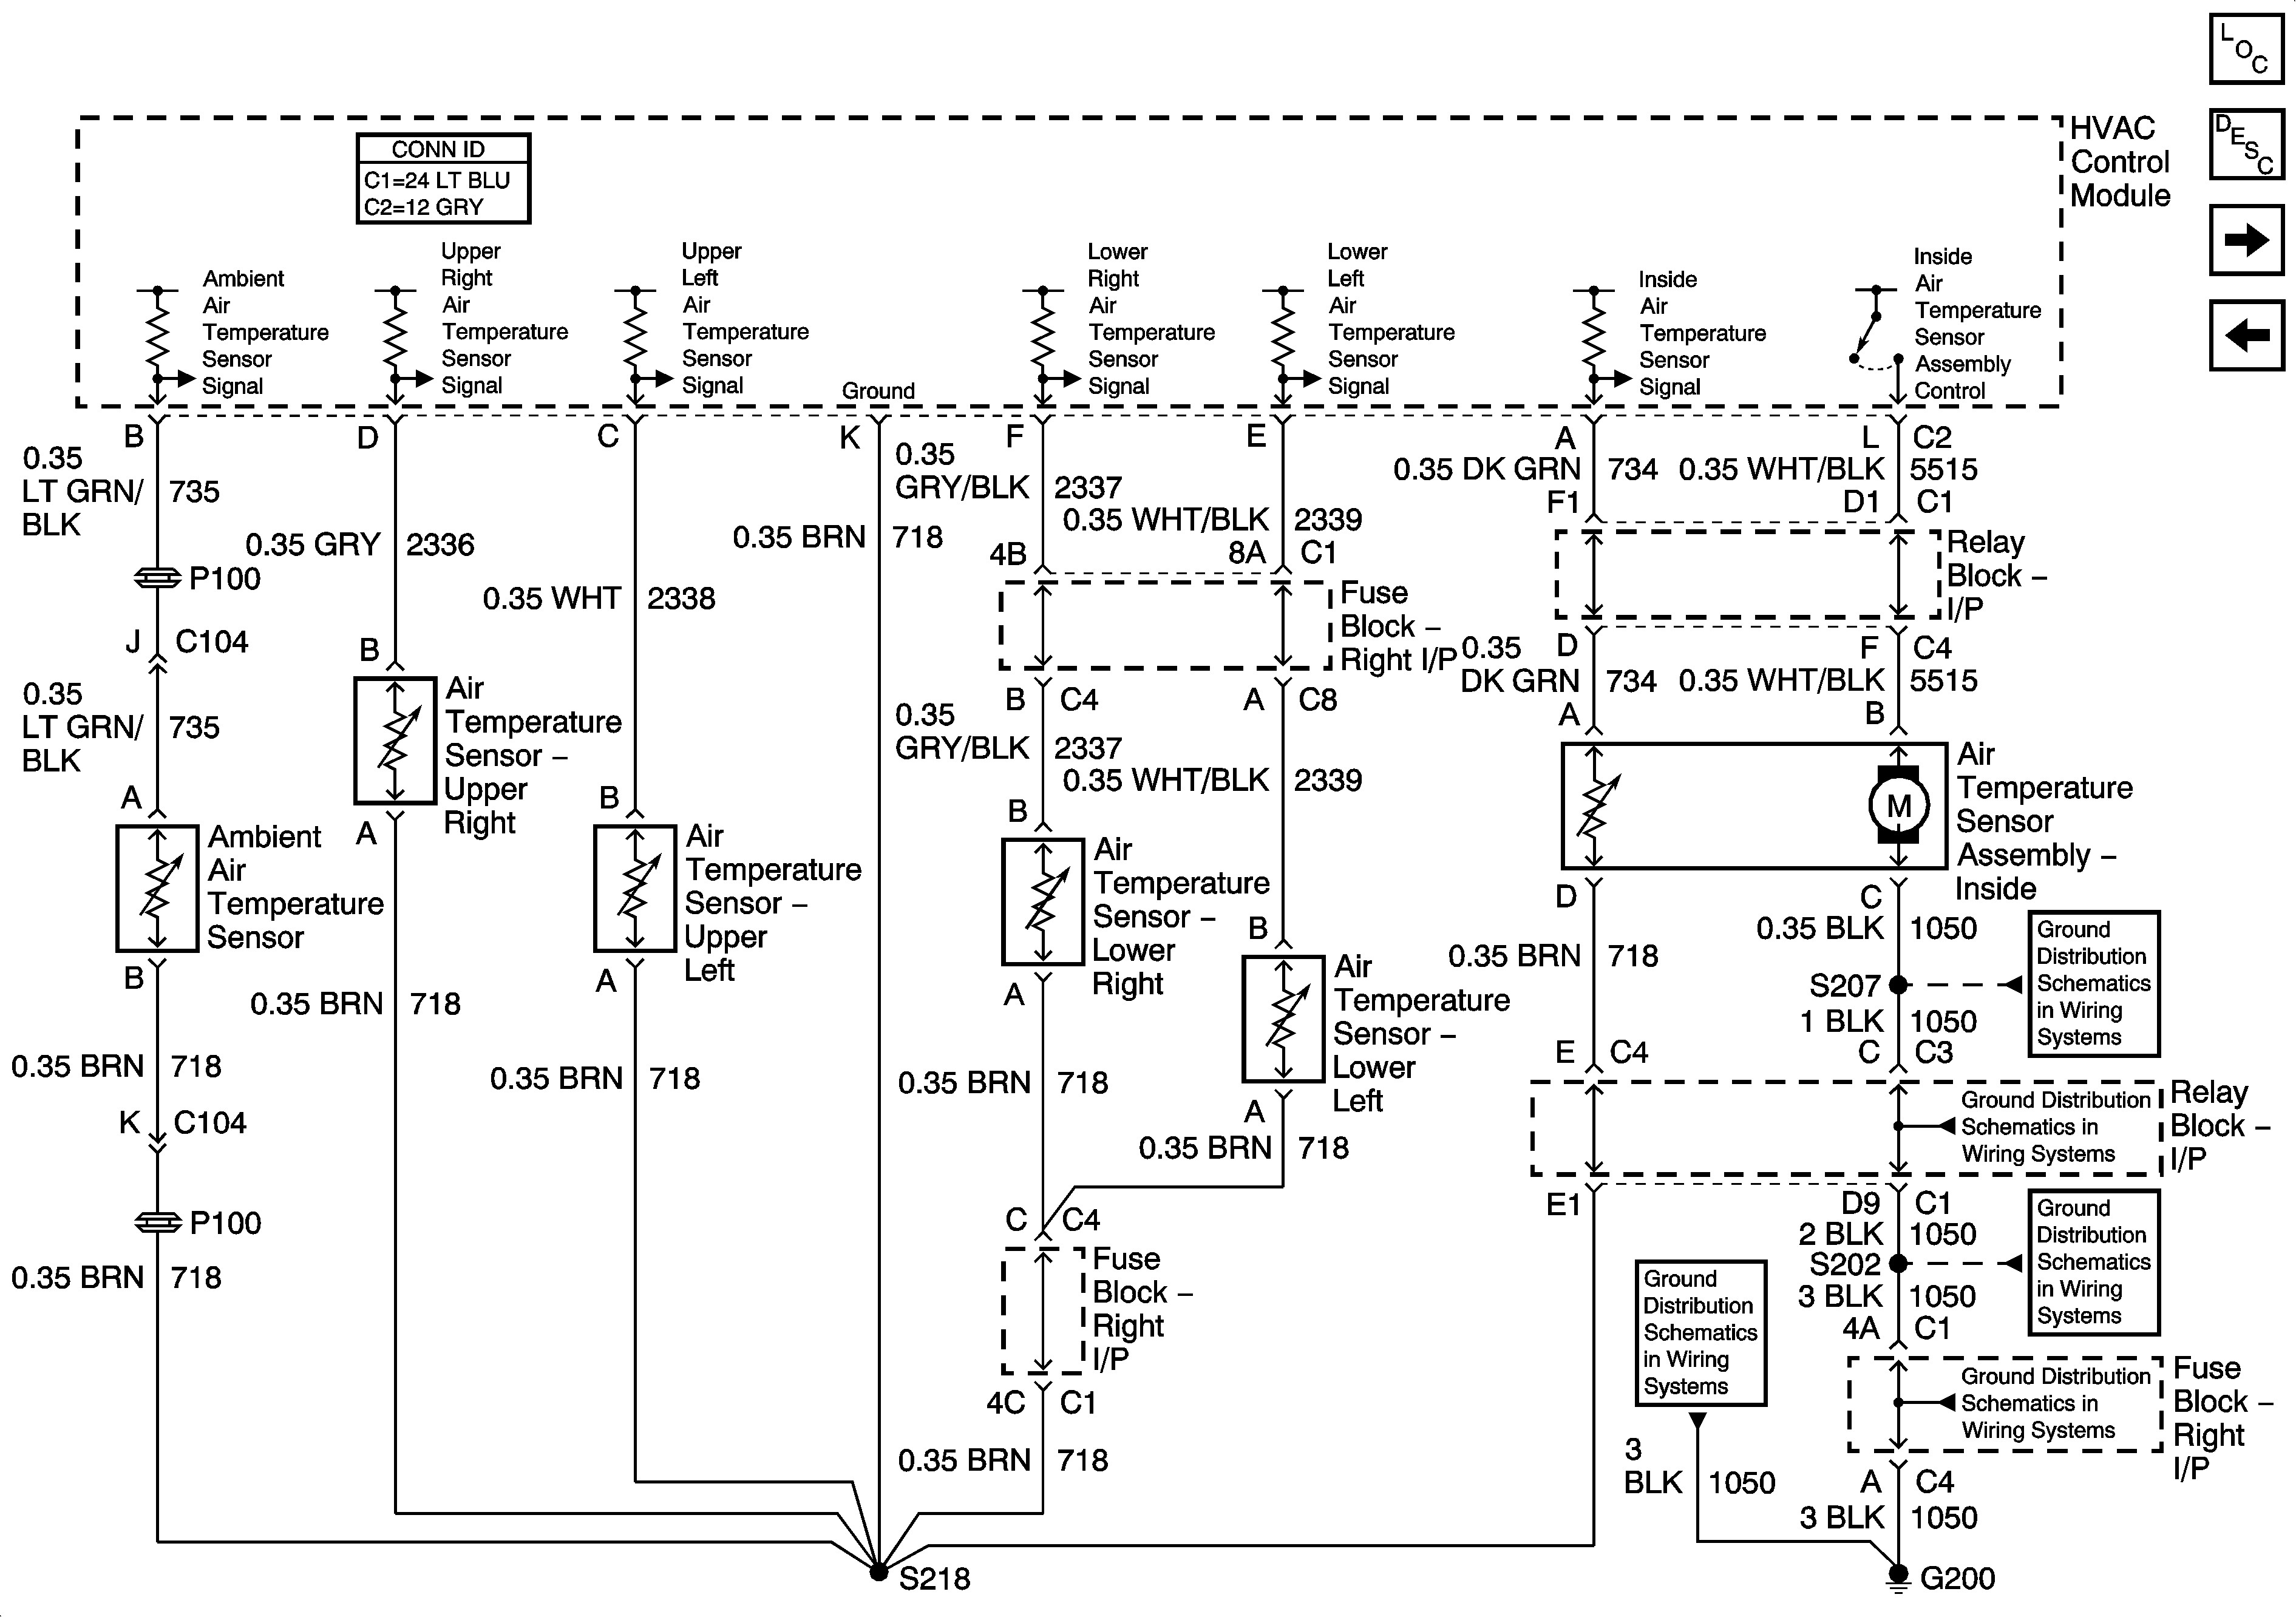 2002 Chevy Tahoe Engine Diagram 1995 Chevrolet Tahoe System Wiring Diagrams Air Conditioning Of 2002 Chevy Tahoe Engine Diagram